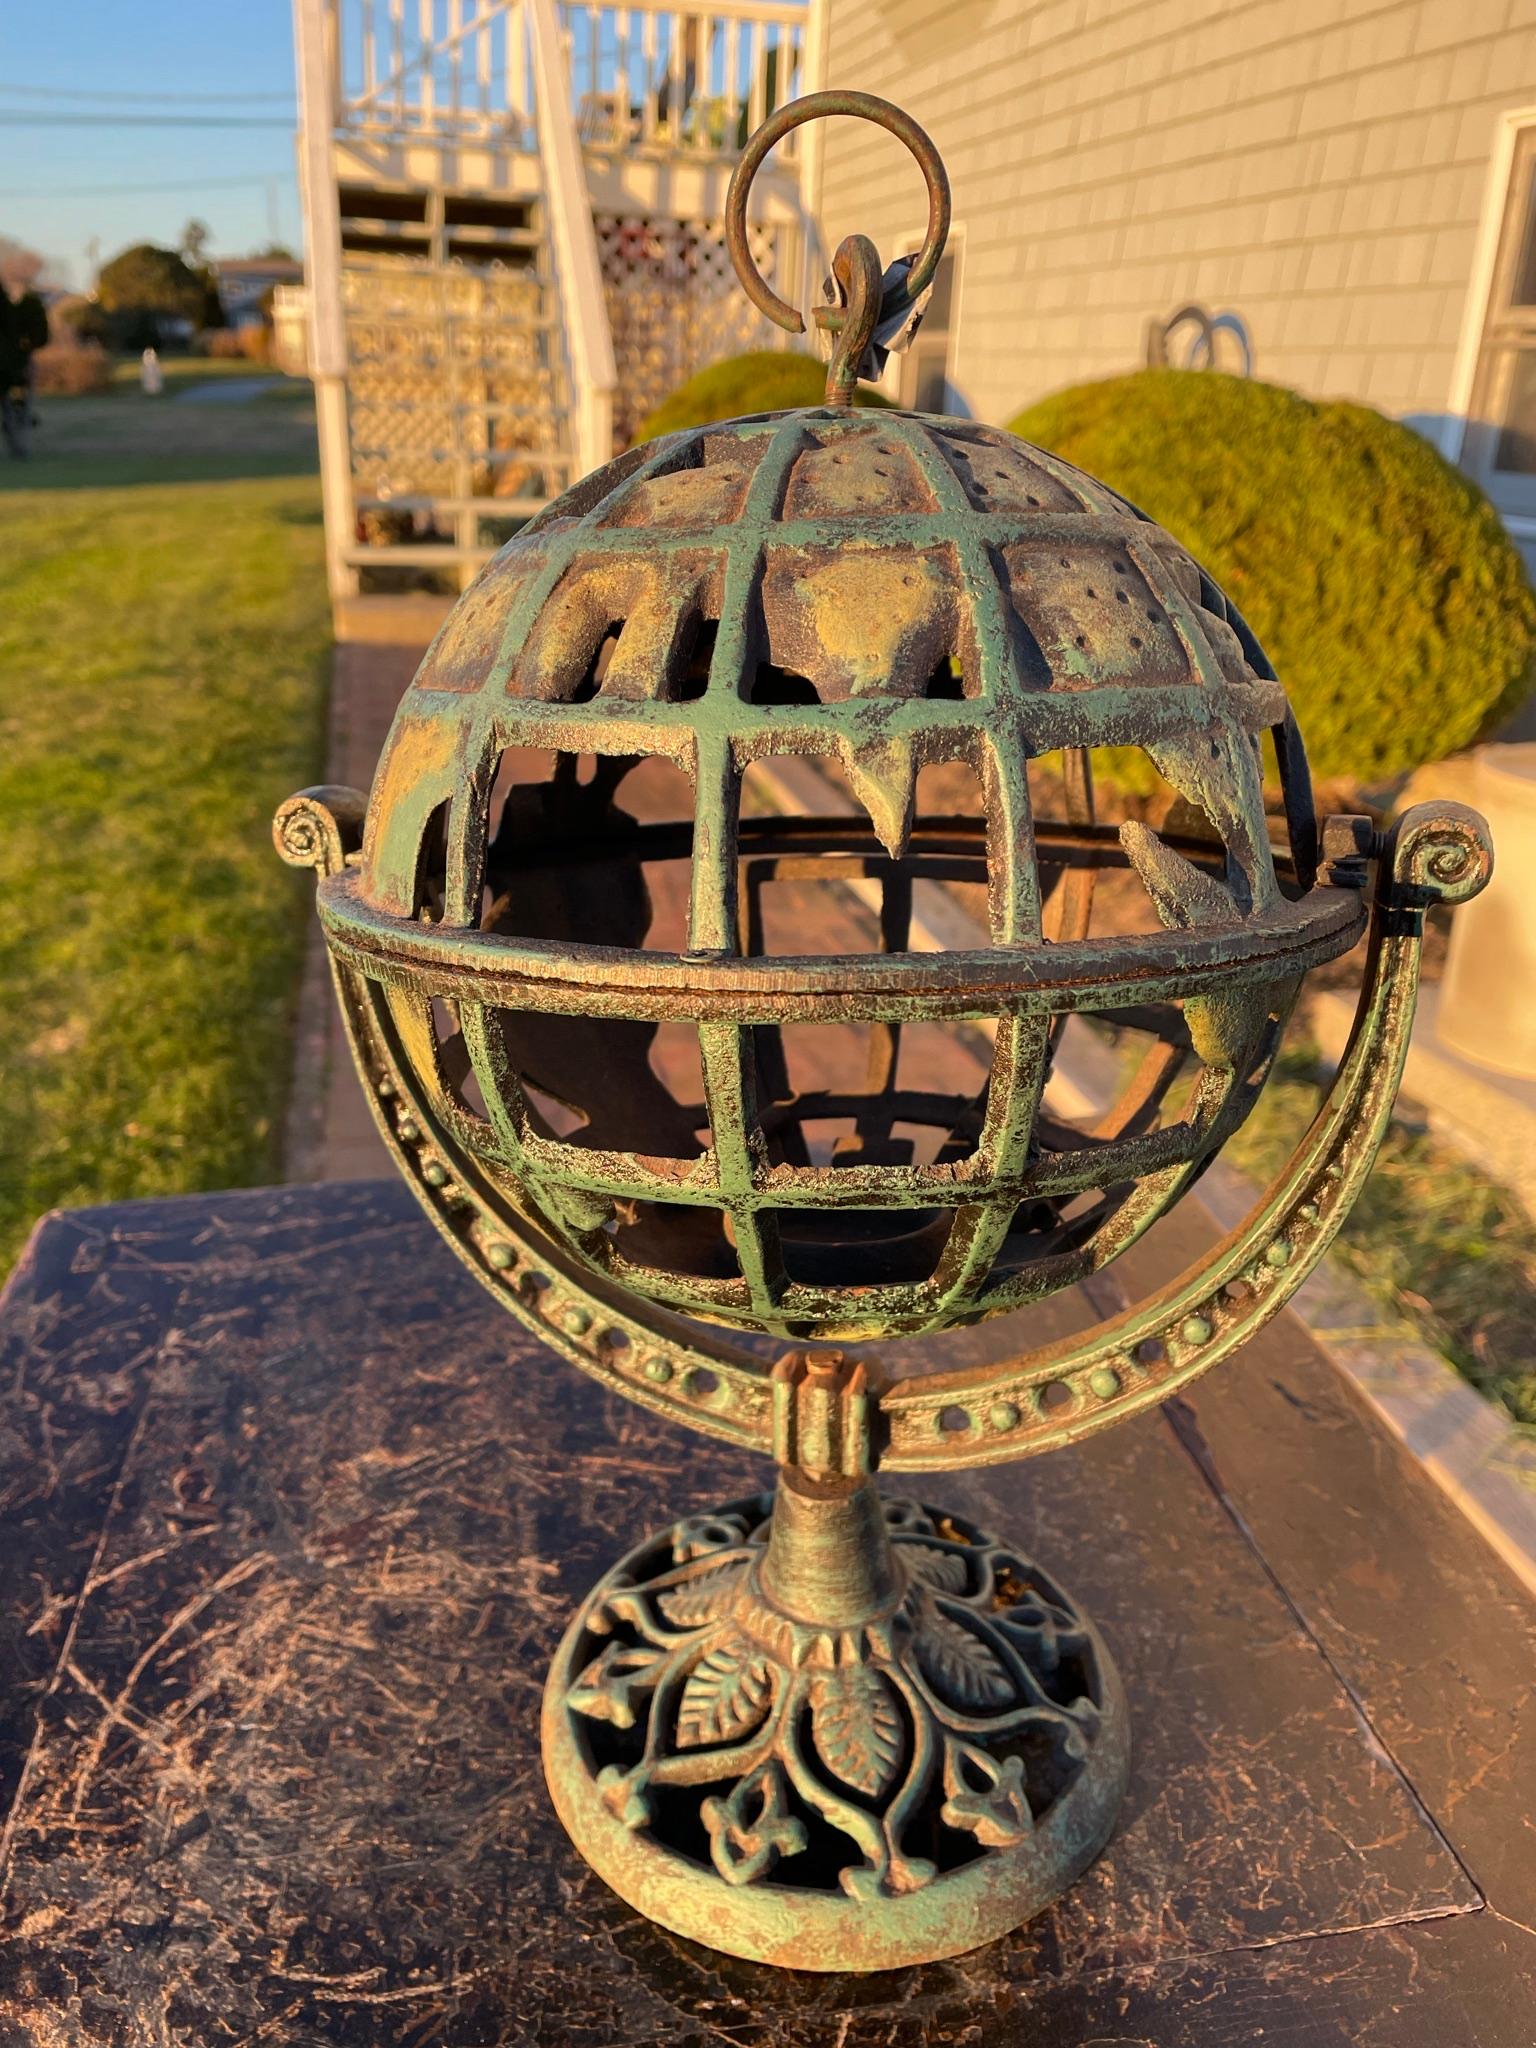 Japanese Old Unique Five Continents Globe Lighting Lantern 8